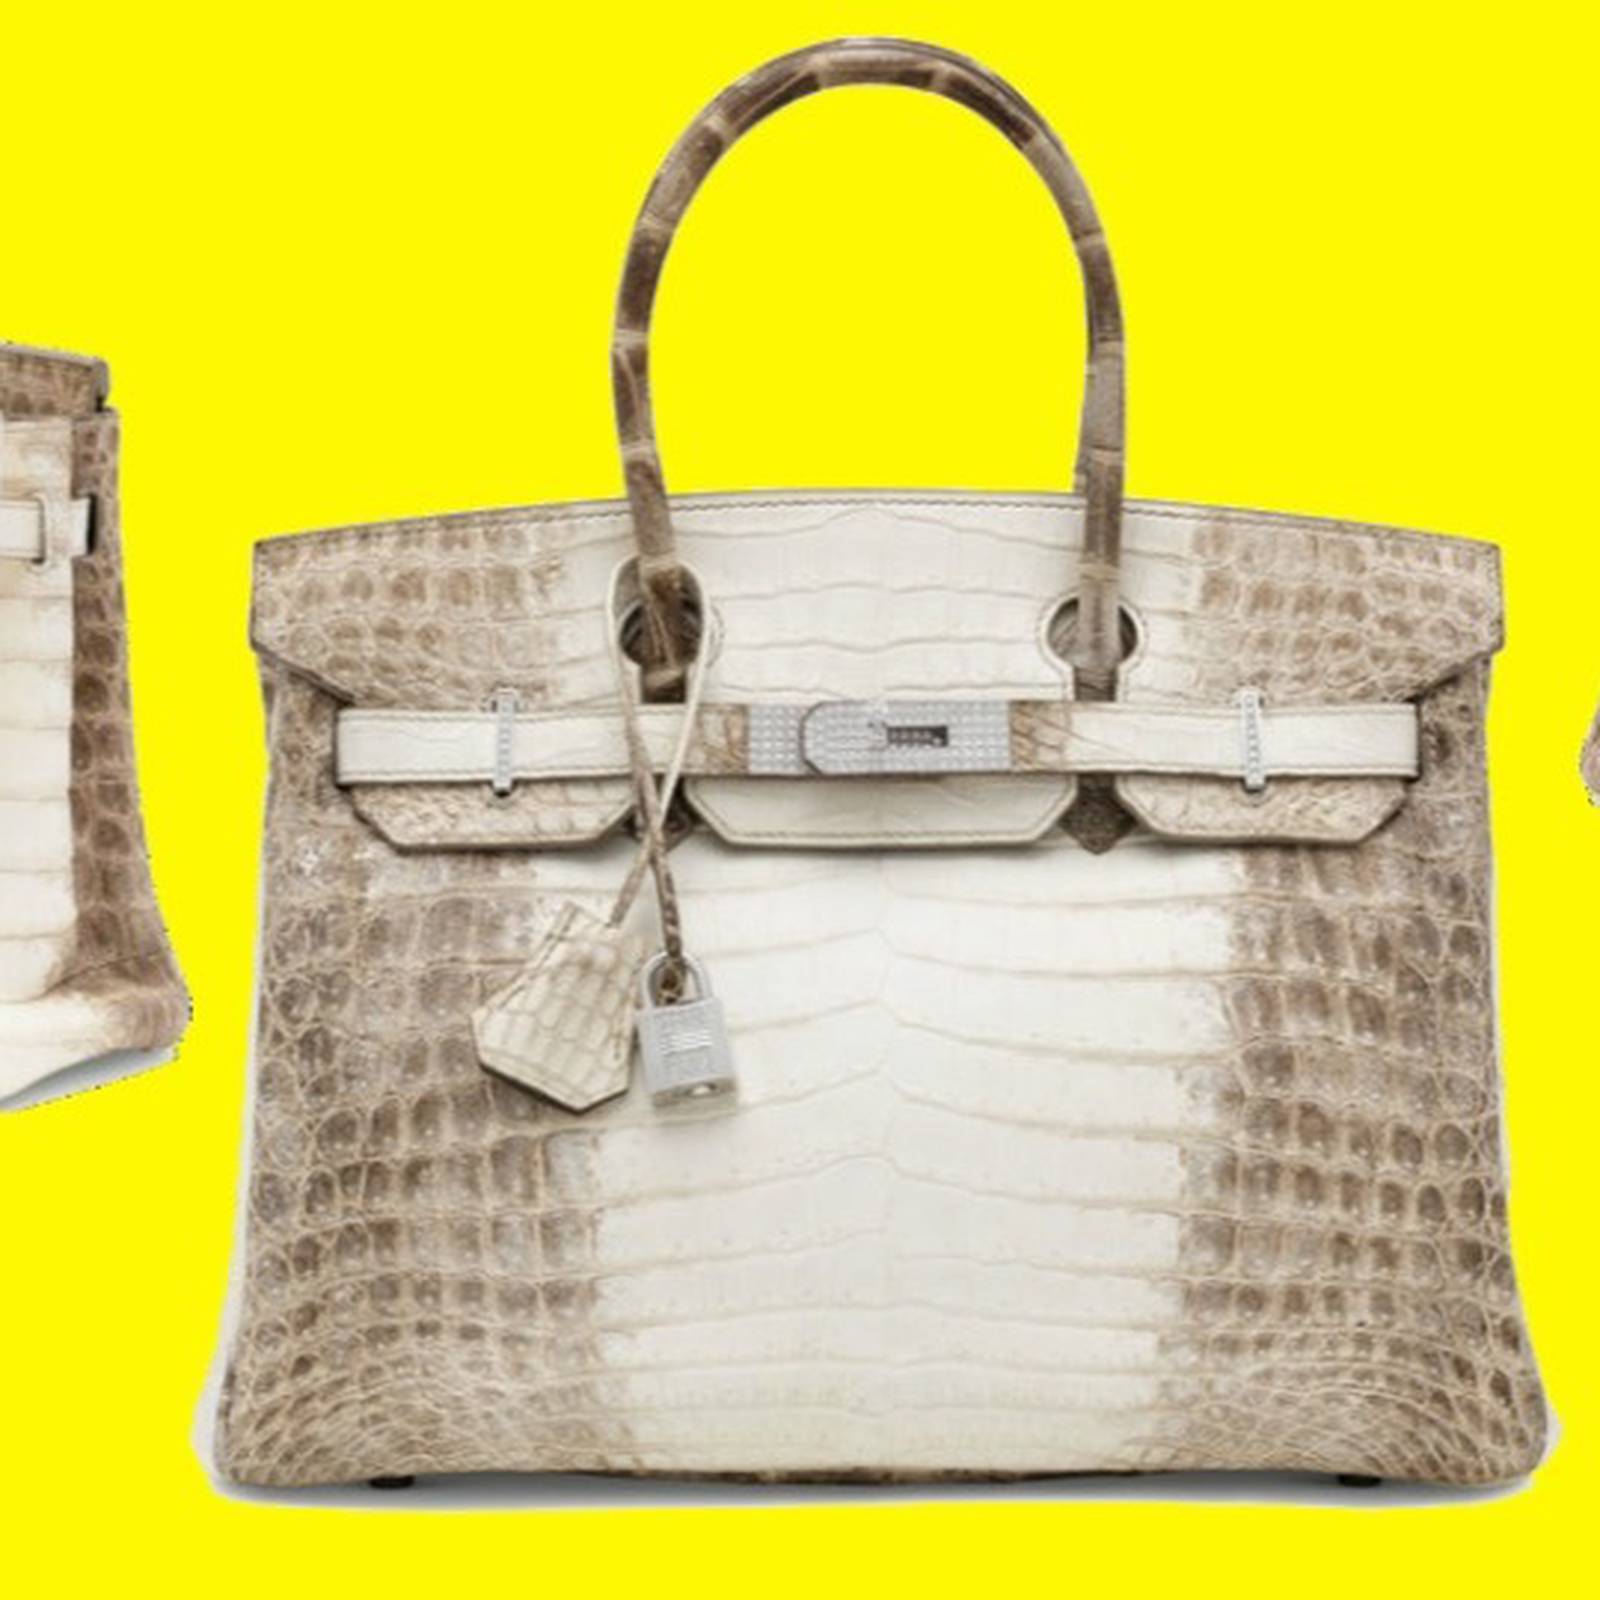 Ten-year-old Hermes Birkin bag sells for €184,000 at auction in London –  The Irish Times